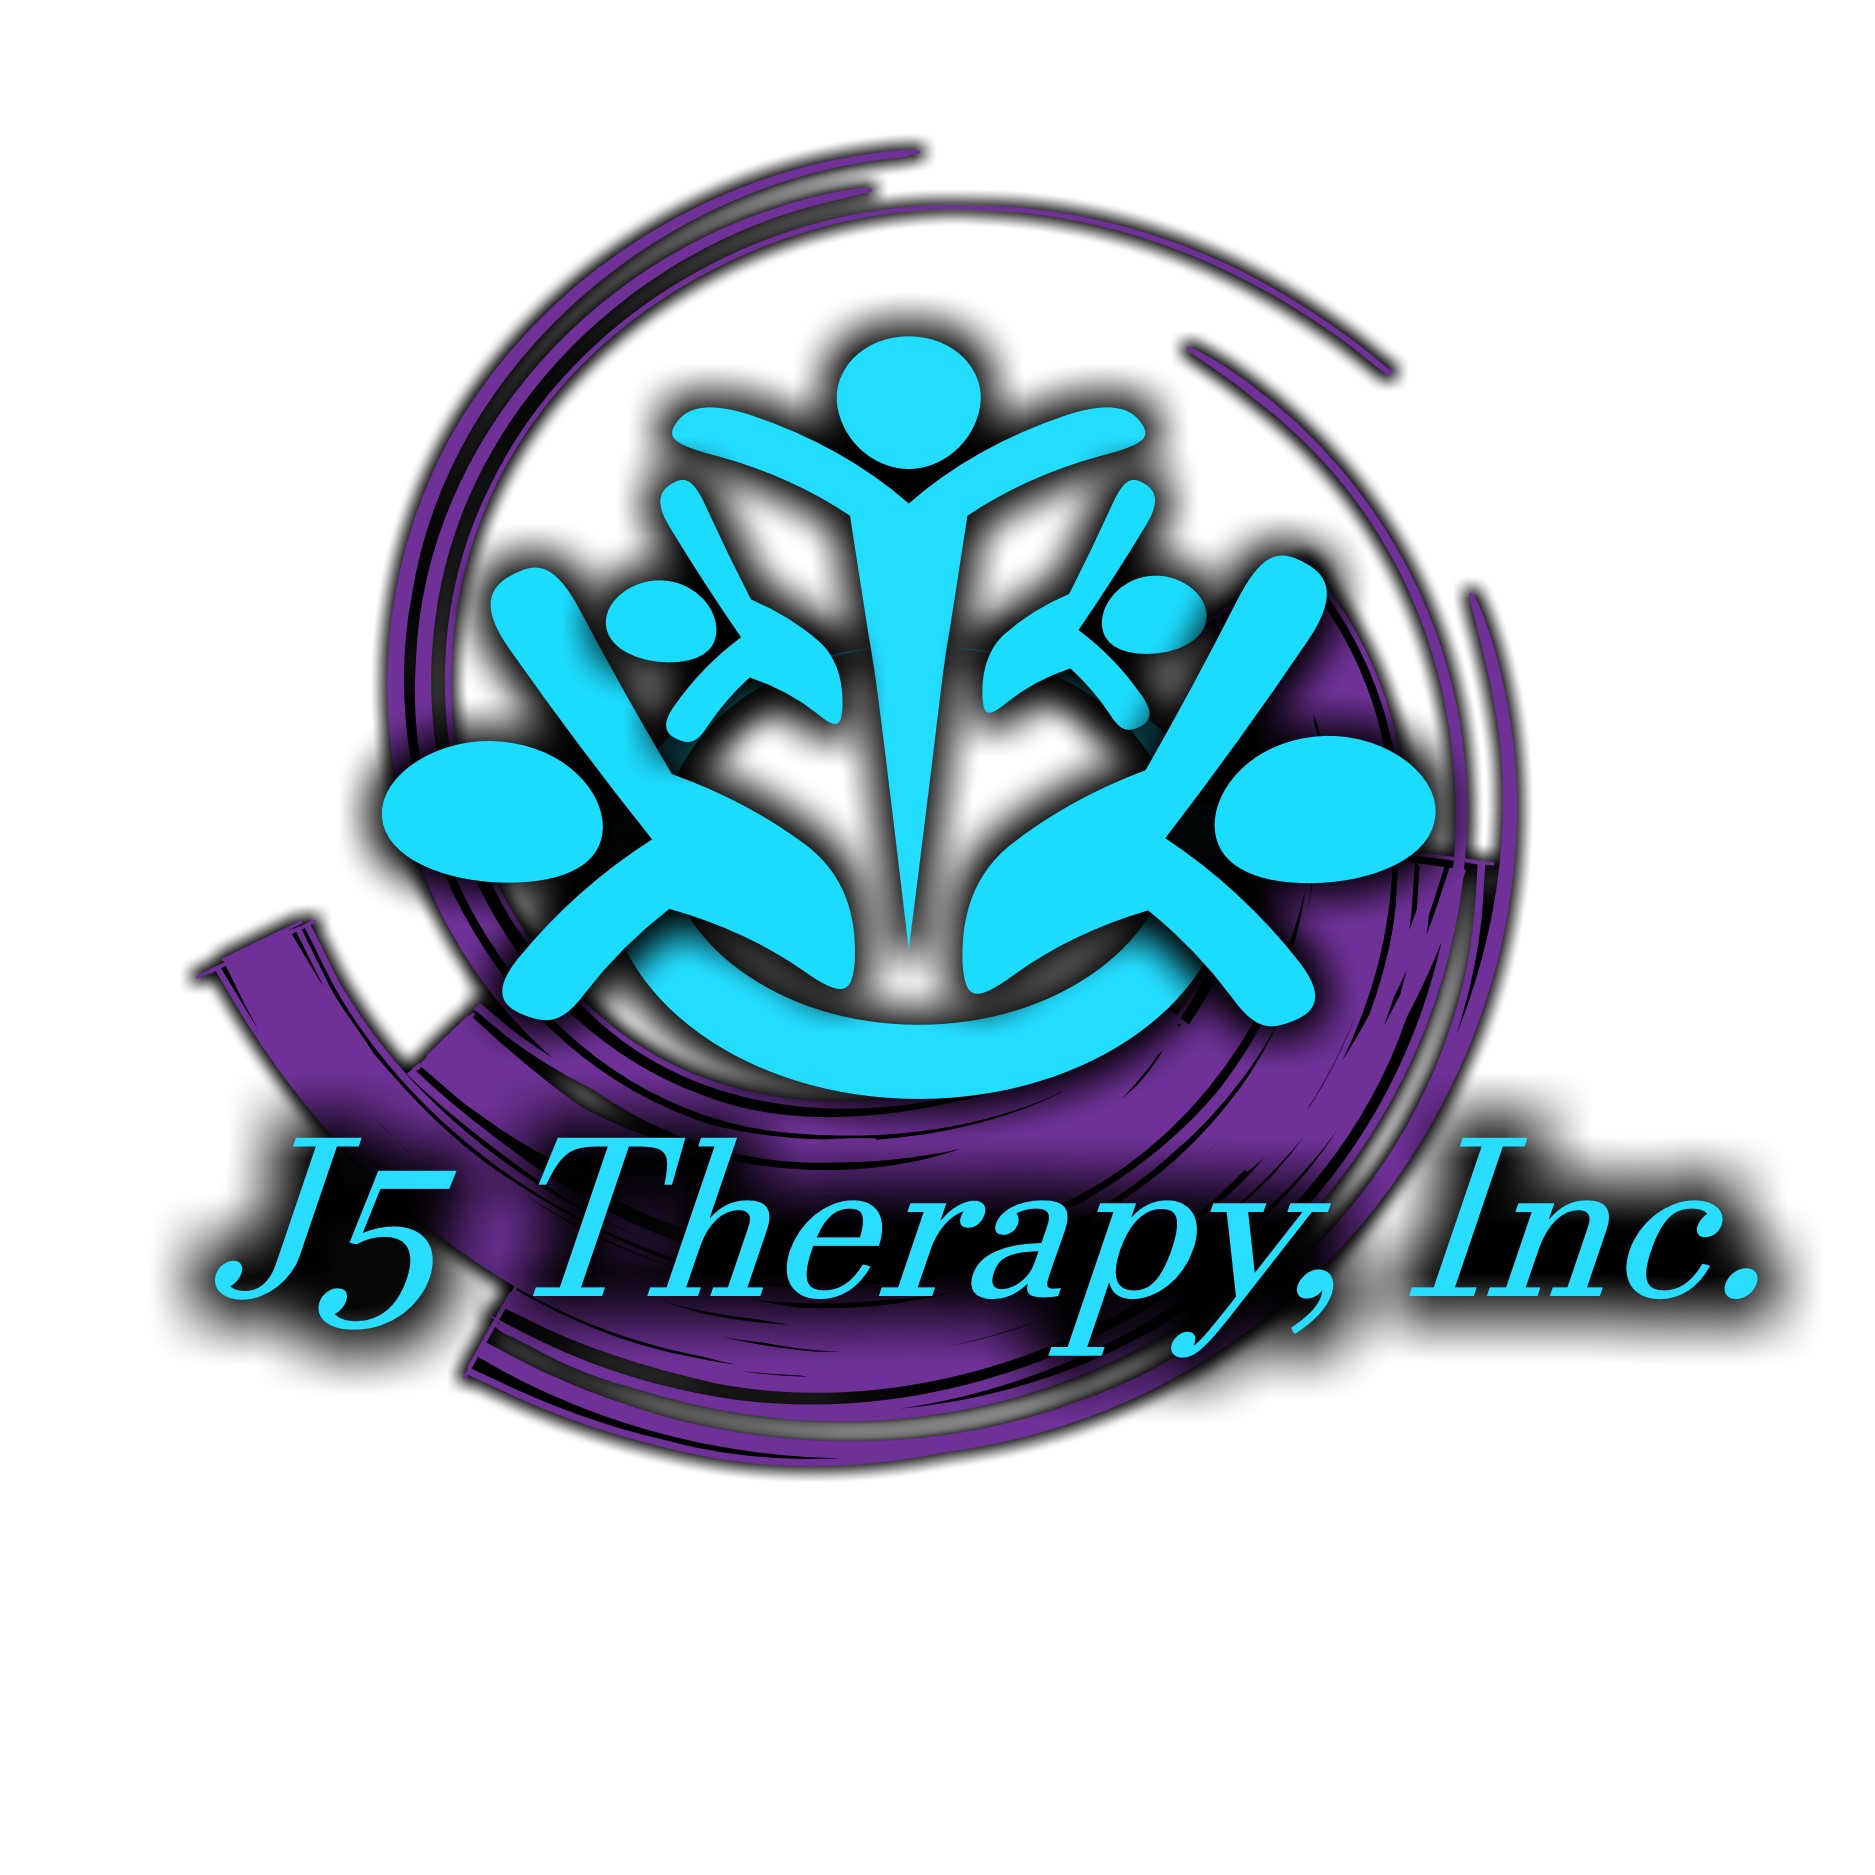 J5 Therapy Inc